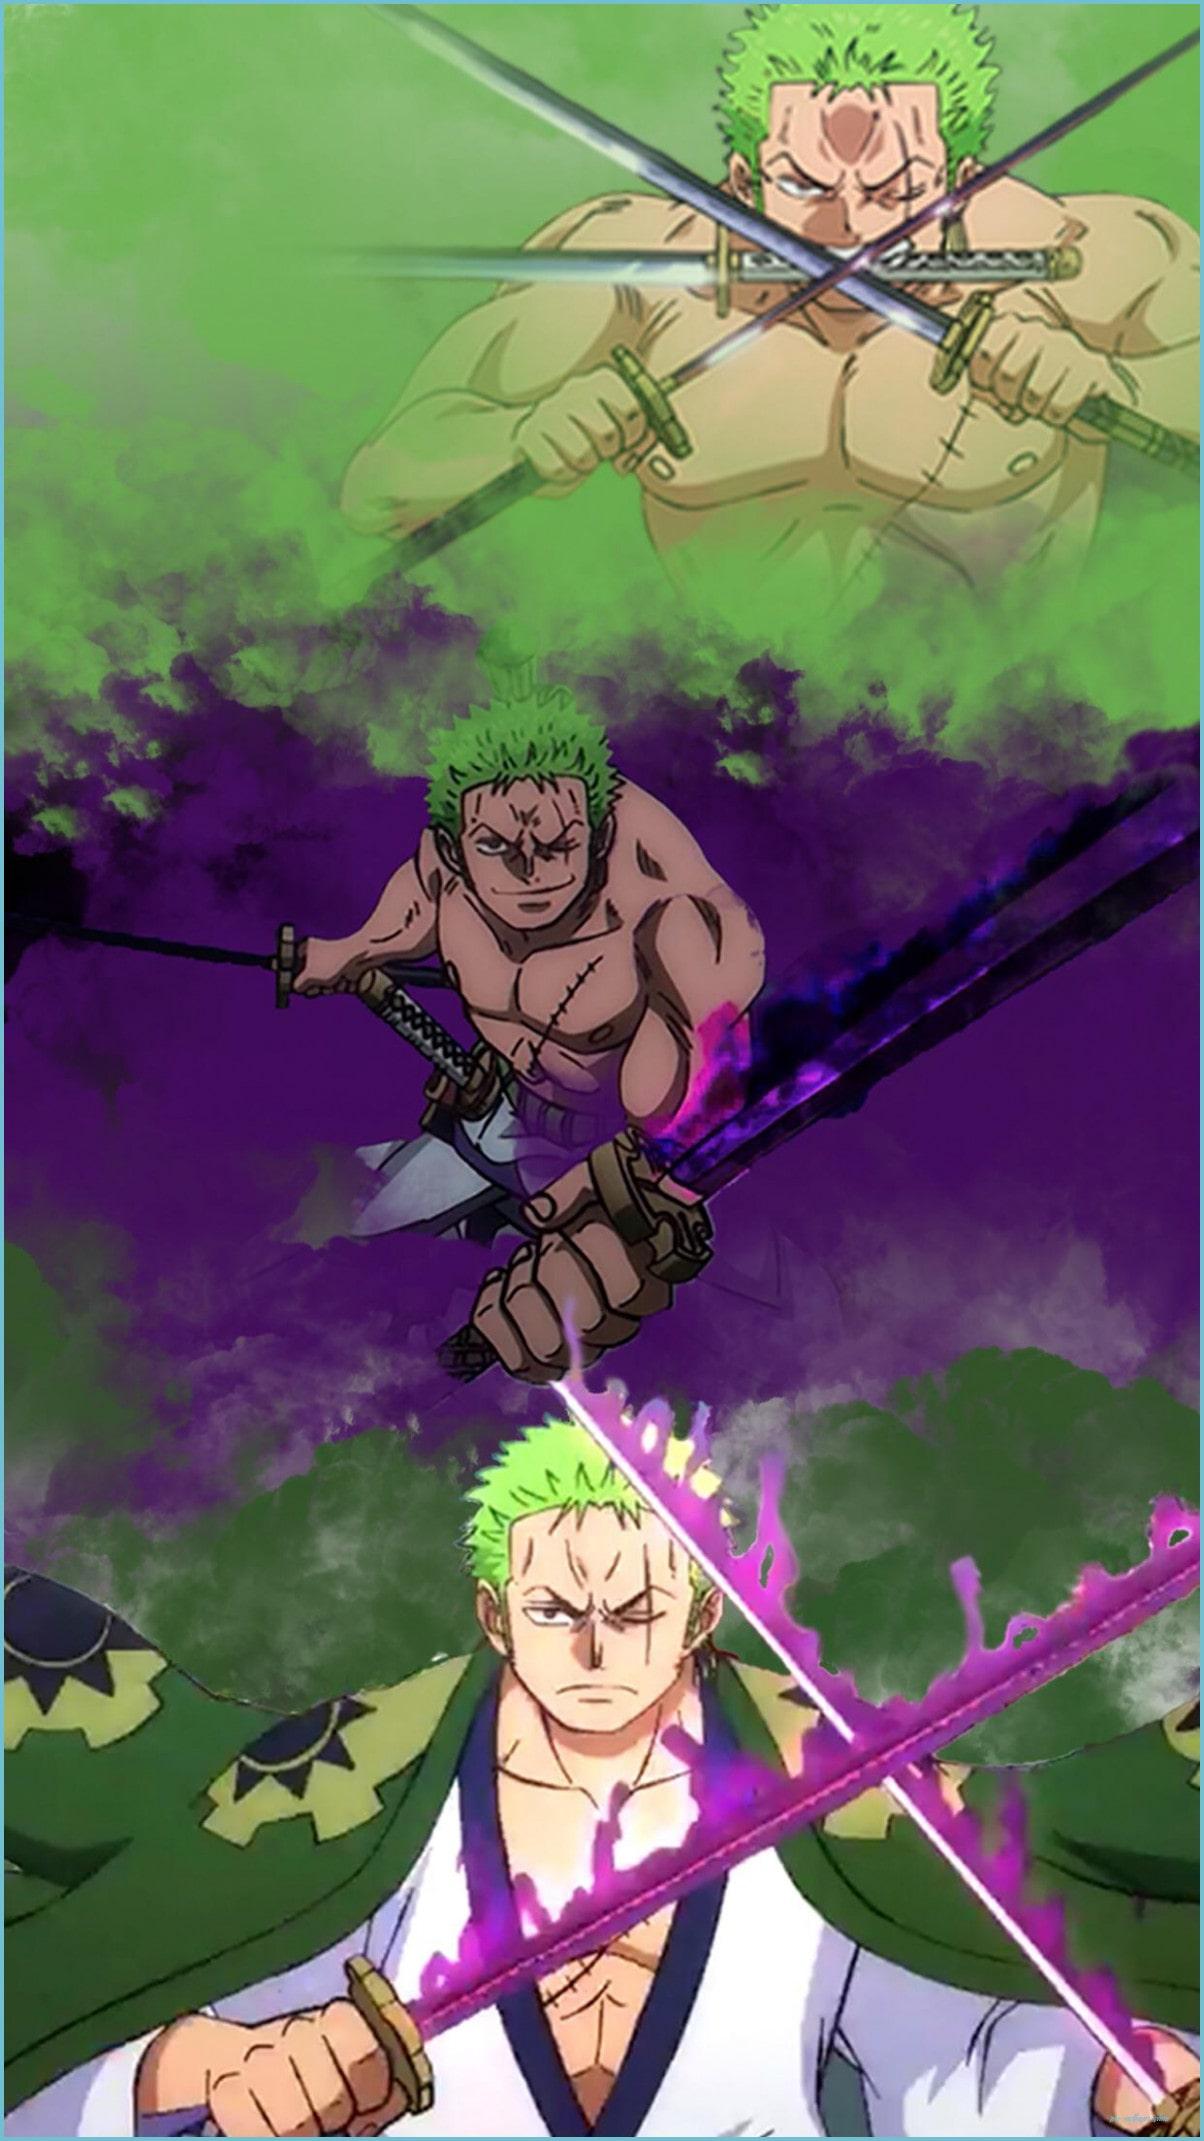 1204 x 2141 · jpeg - Zoro Wallpapers for Iphone - KoLPaPer - Awesome Free HD Wallpapers